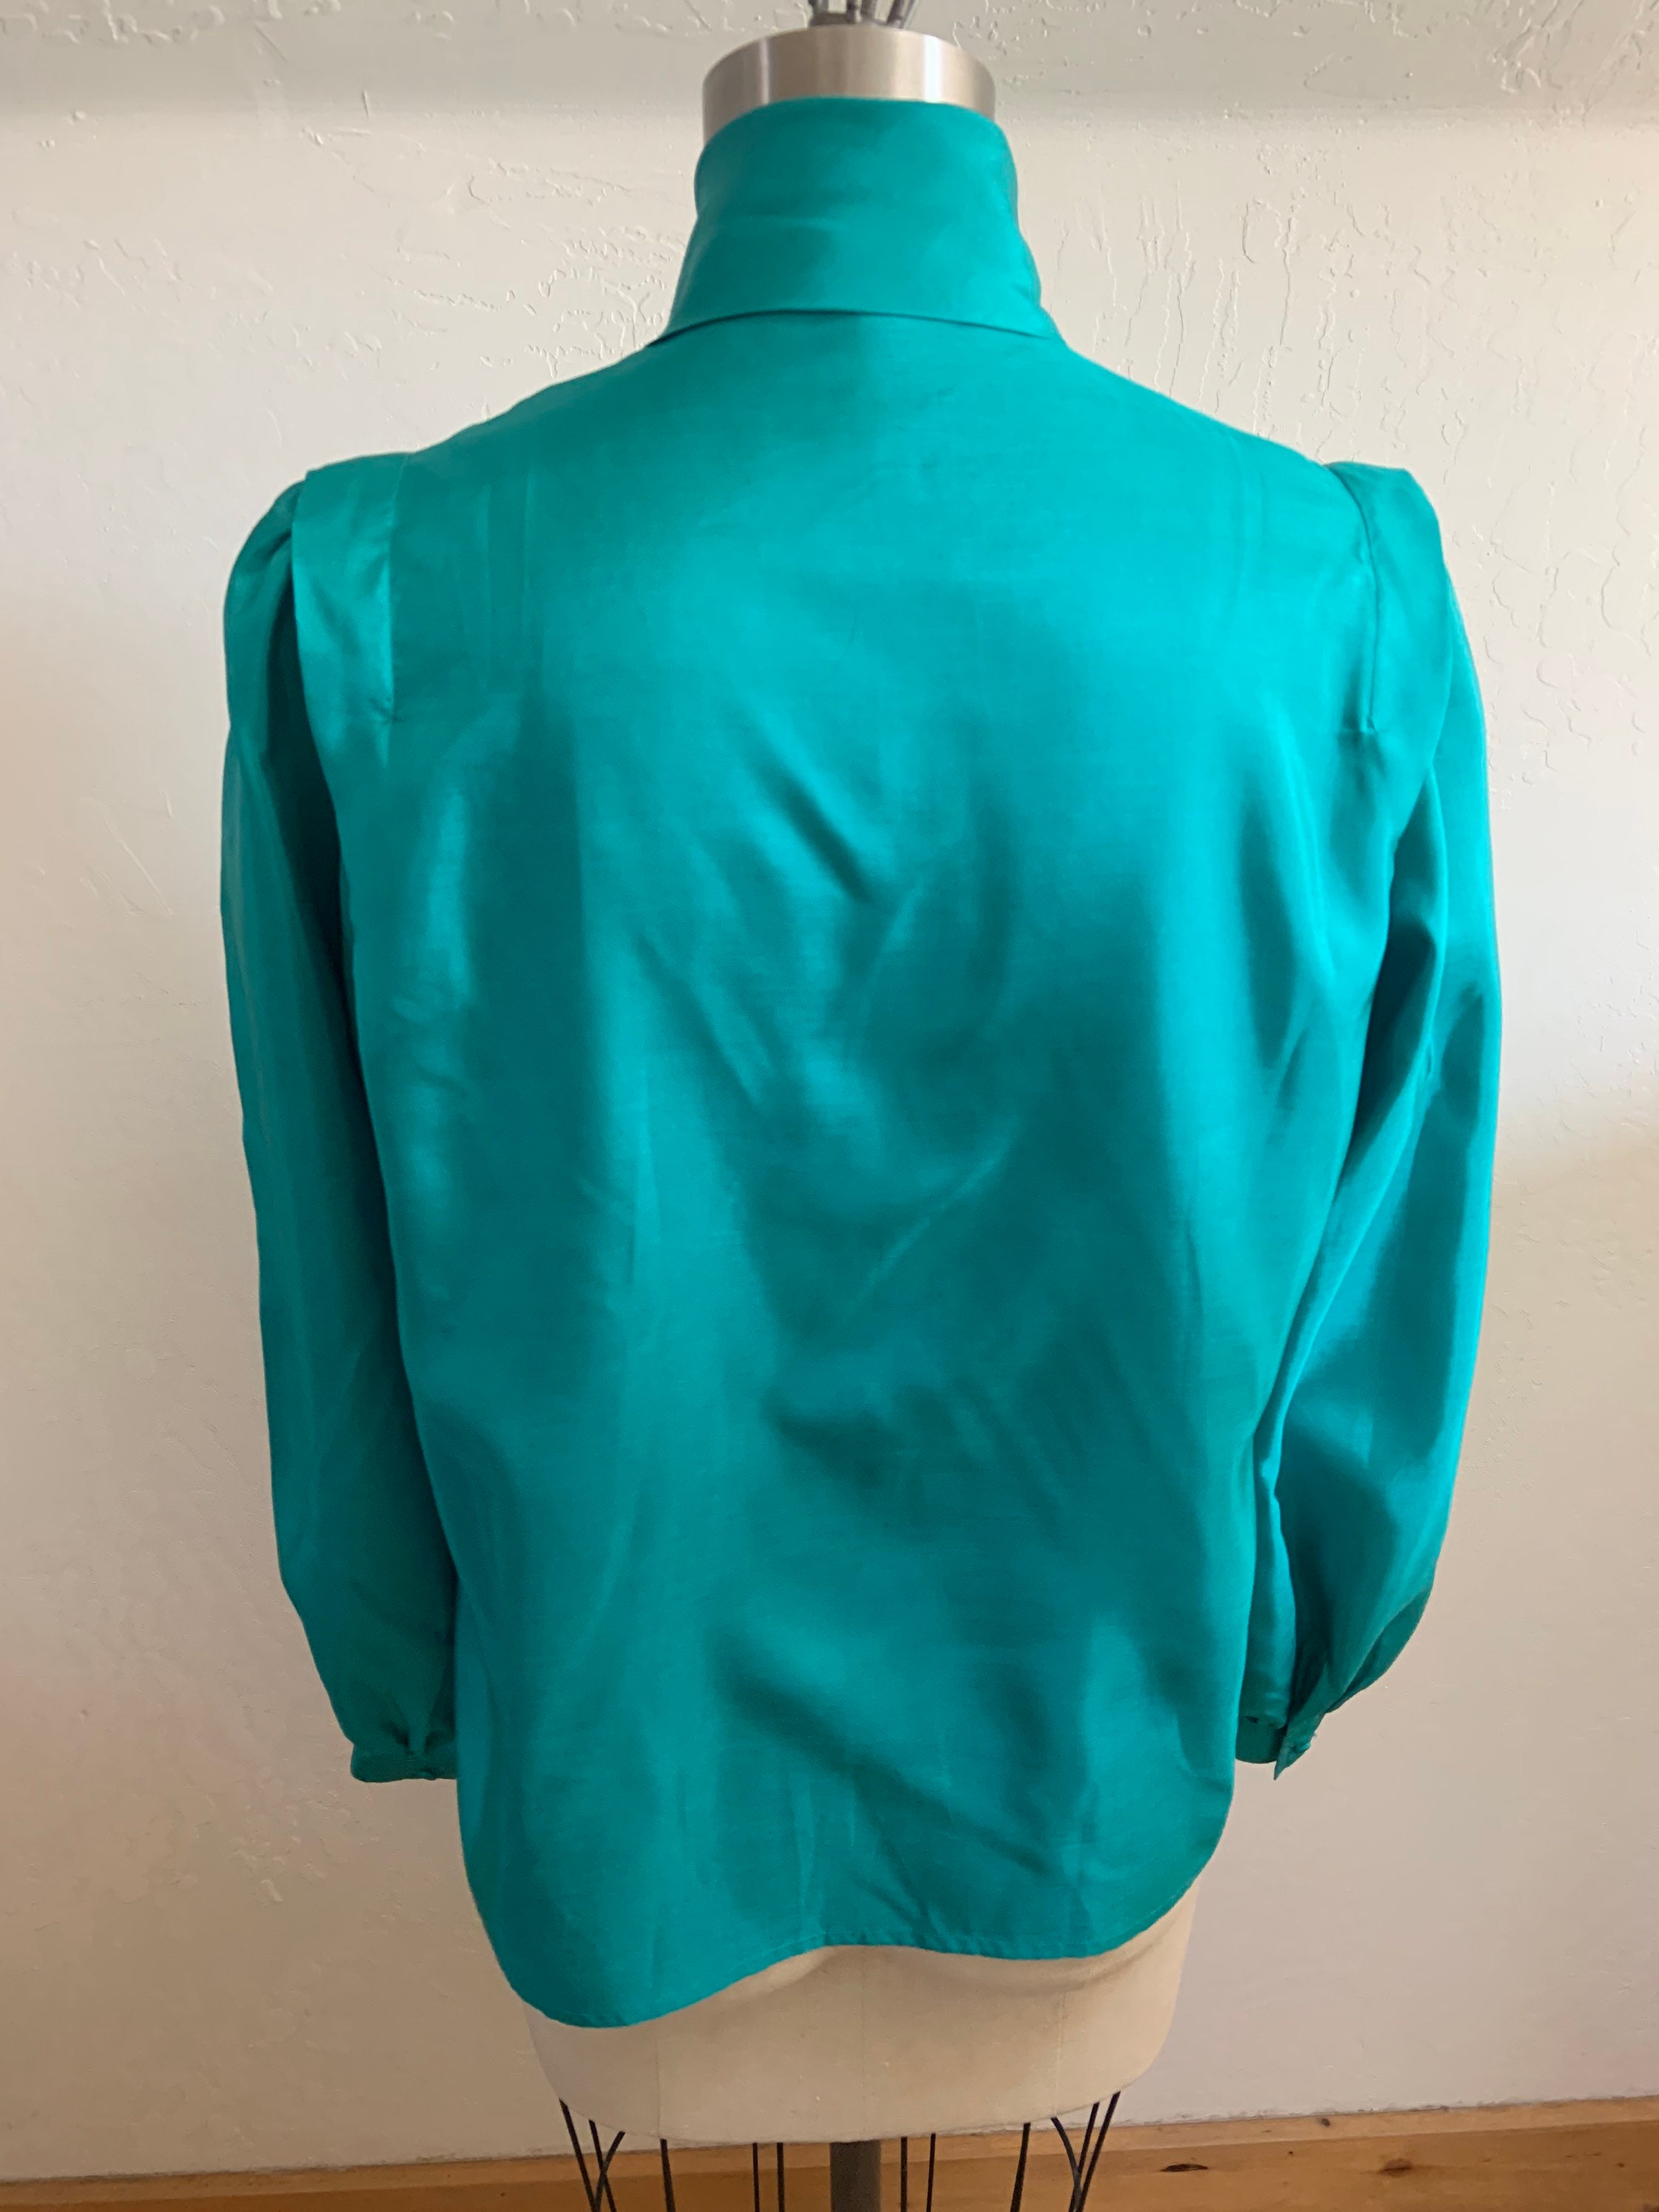 Vintage 1980s Teal Pleat Front Pussy Bow Puffed Sleeve Blouse Medium ...